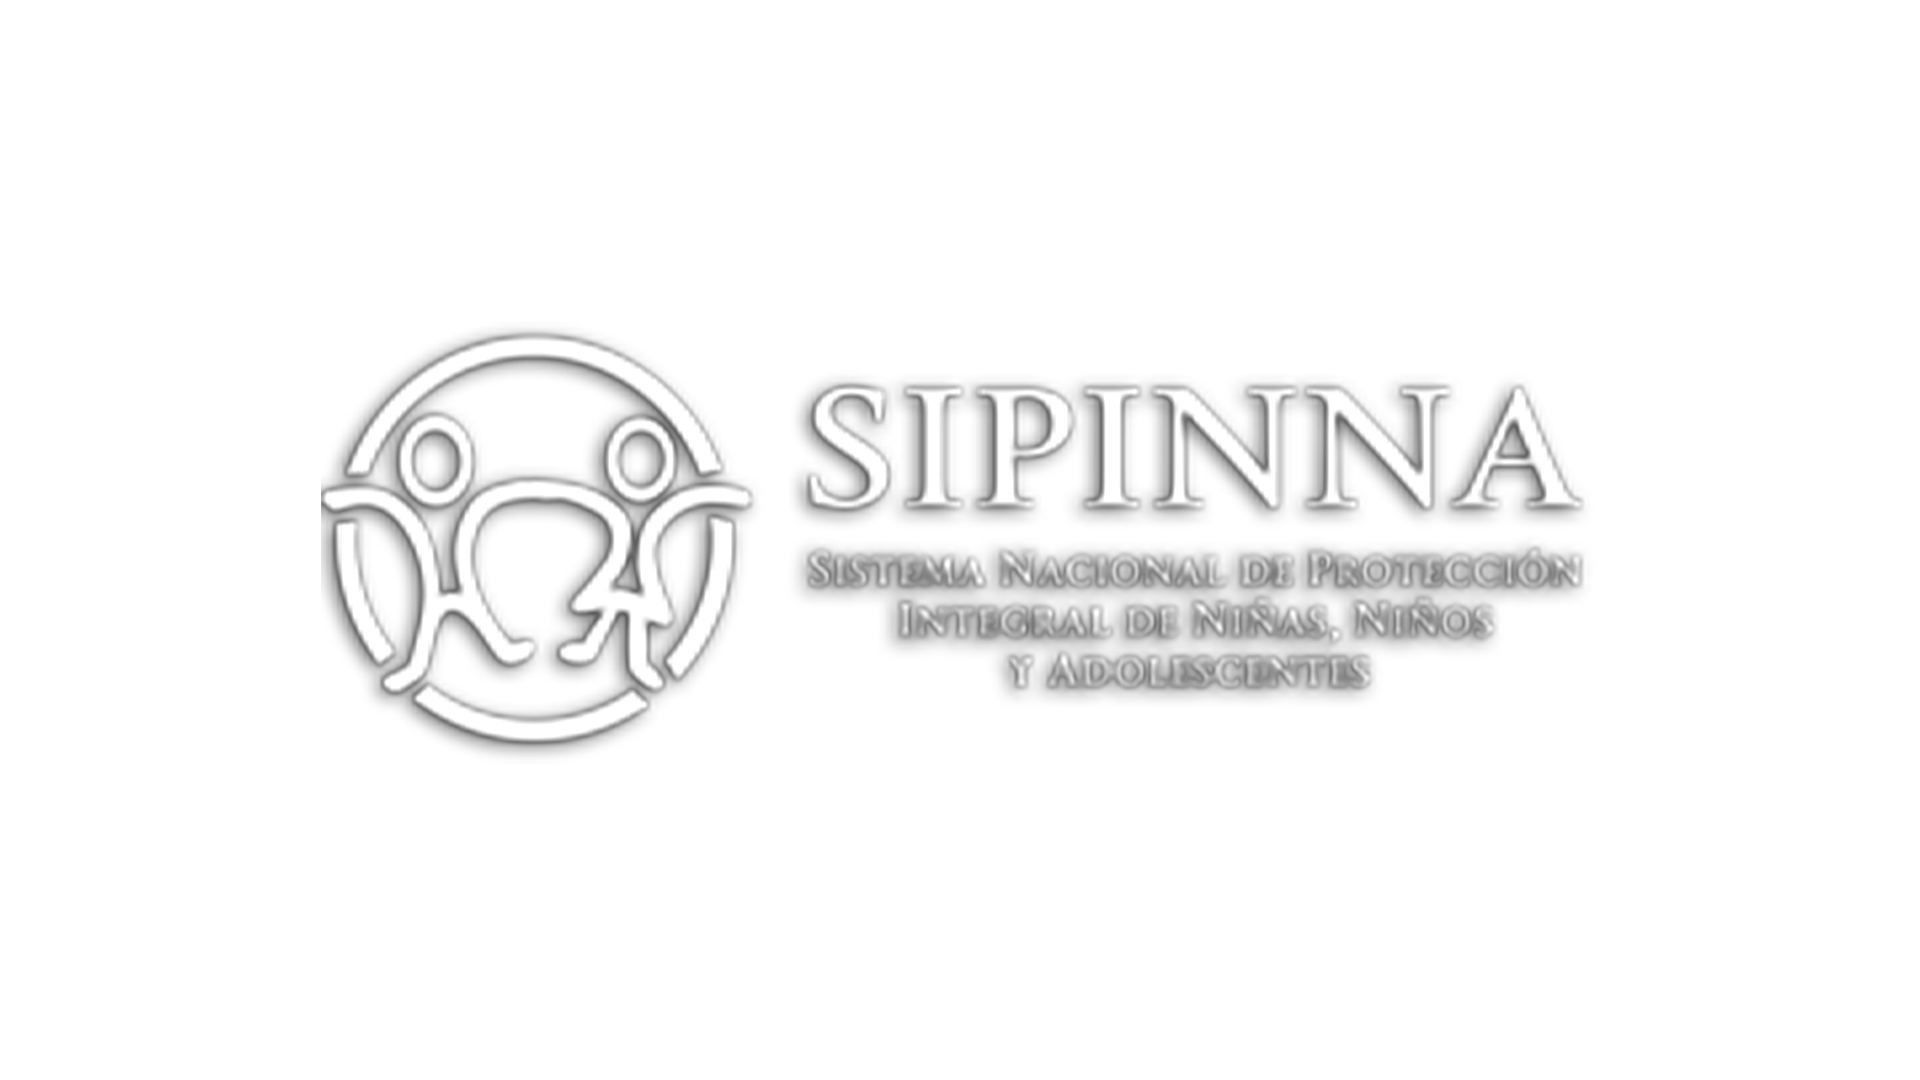 SIPPINA